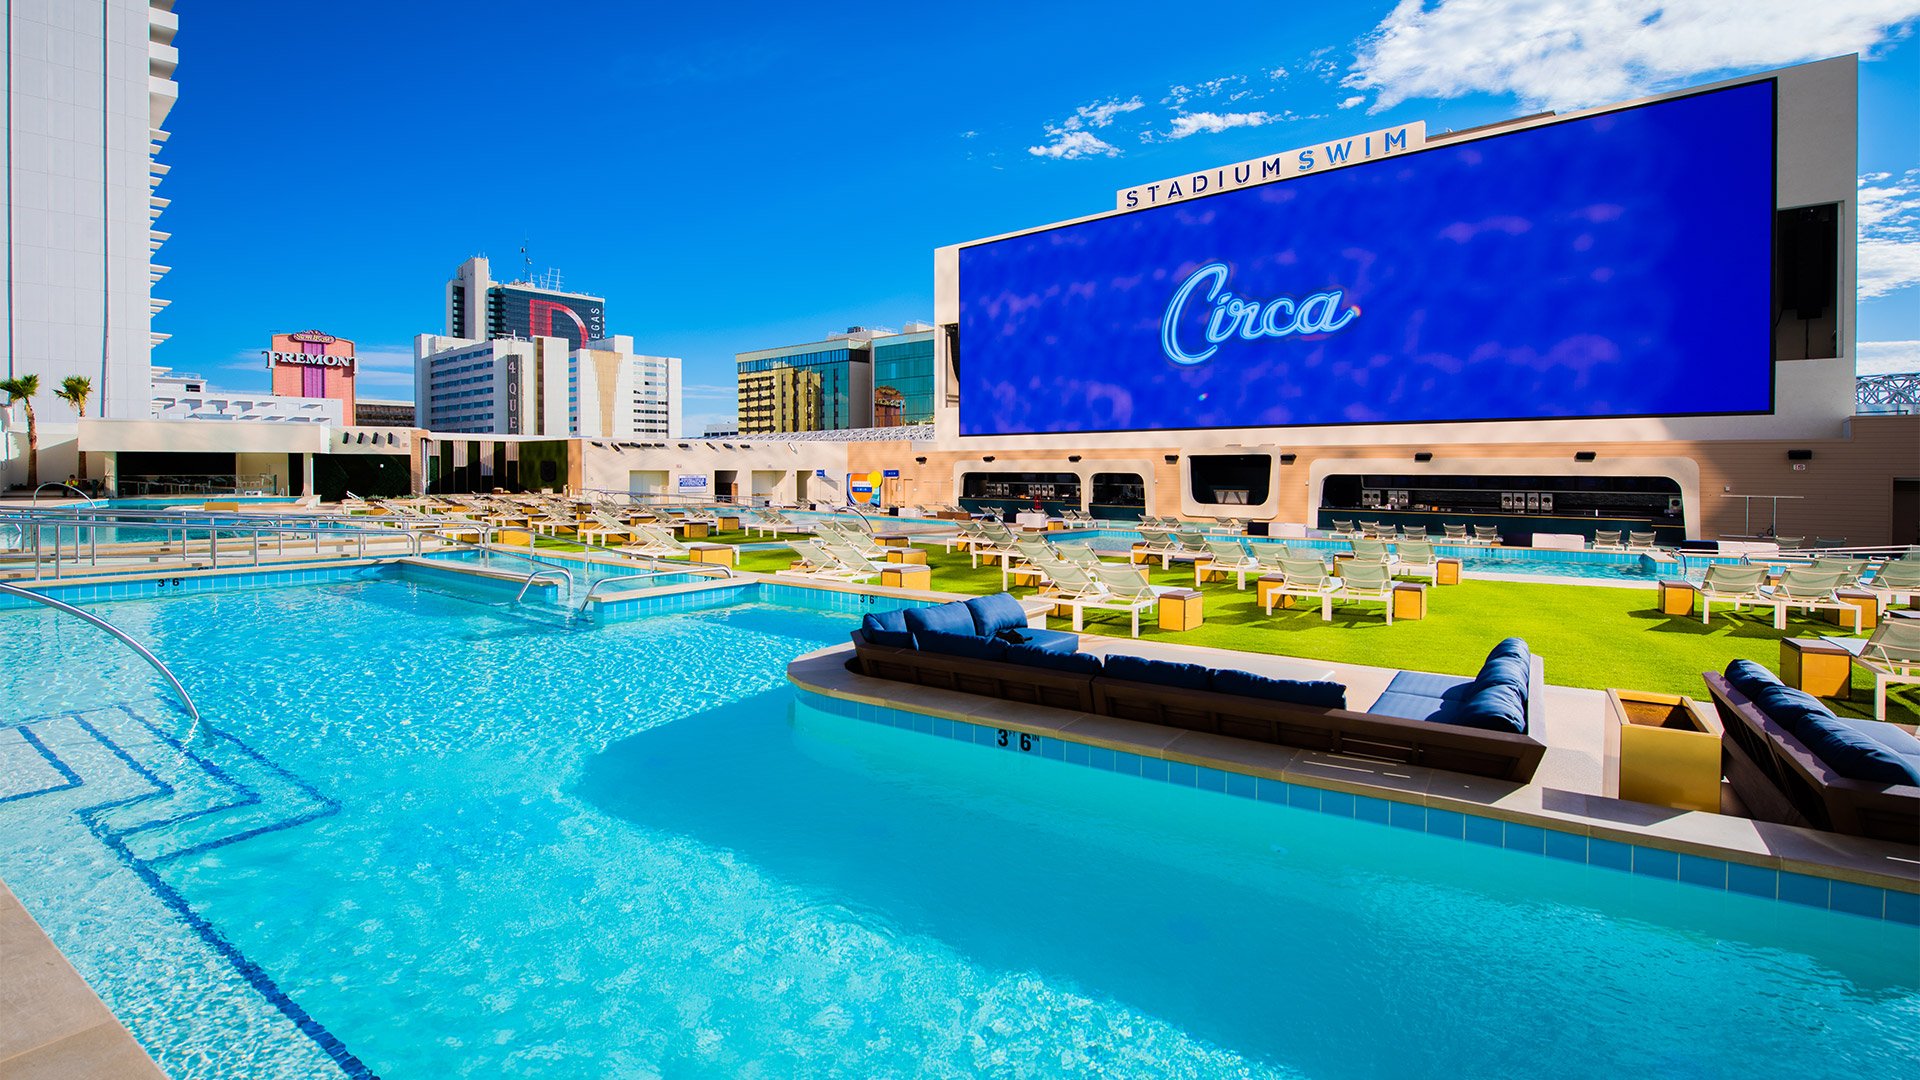 Circa to host Red Bull Watch Party, launch exclusive hotel package for inaugural F1 Las Vegas race Yogonet International